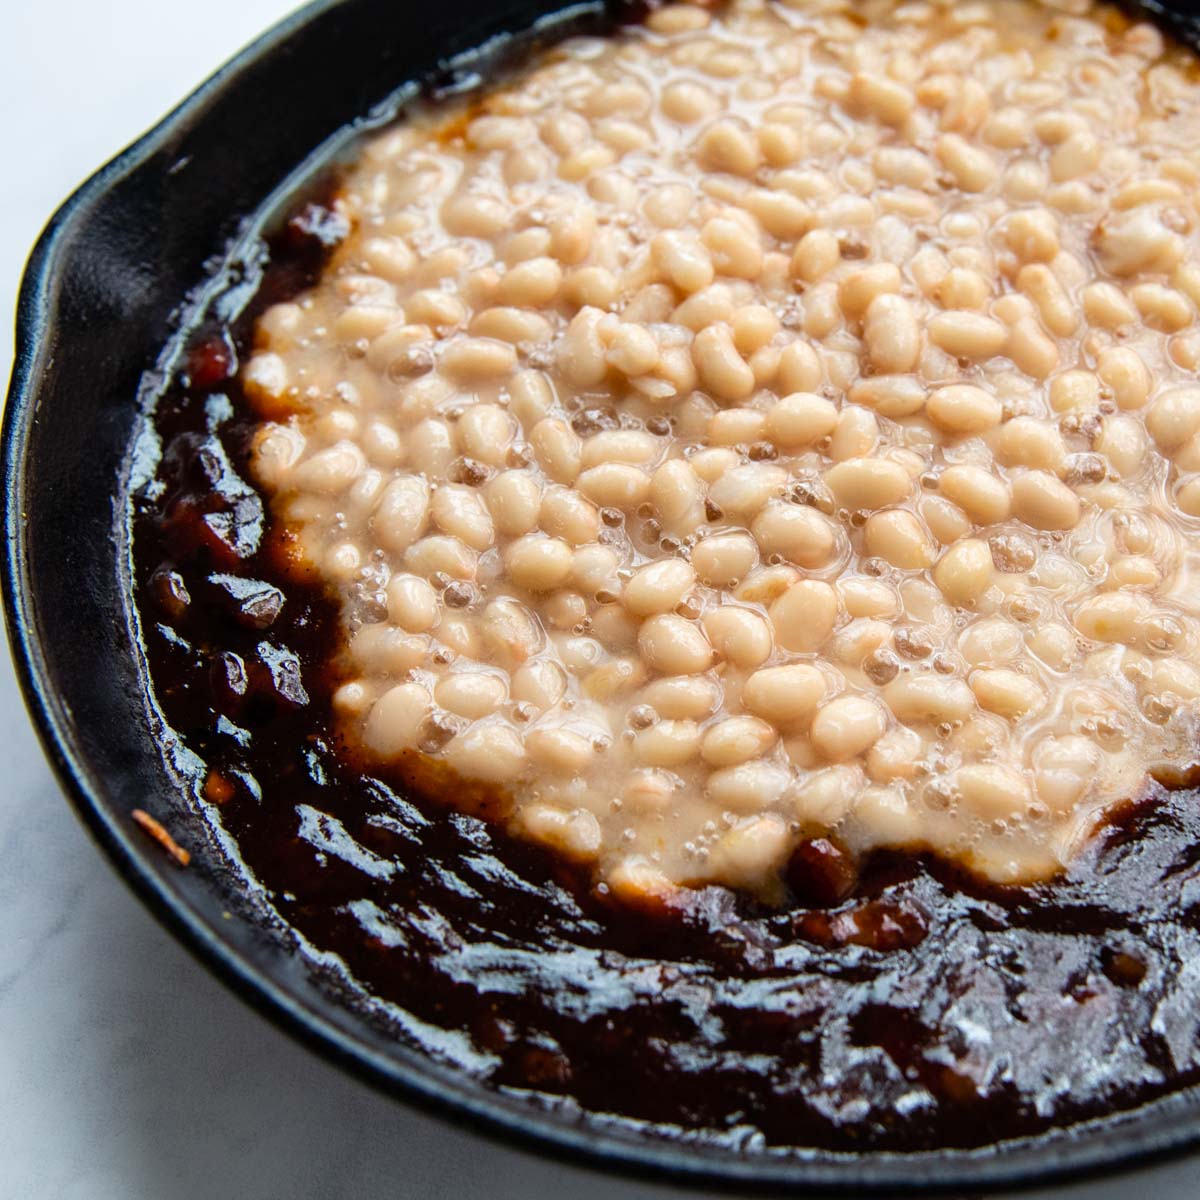 image showing the beans being stirred into the sauce.